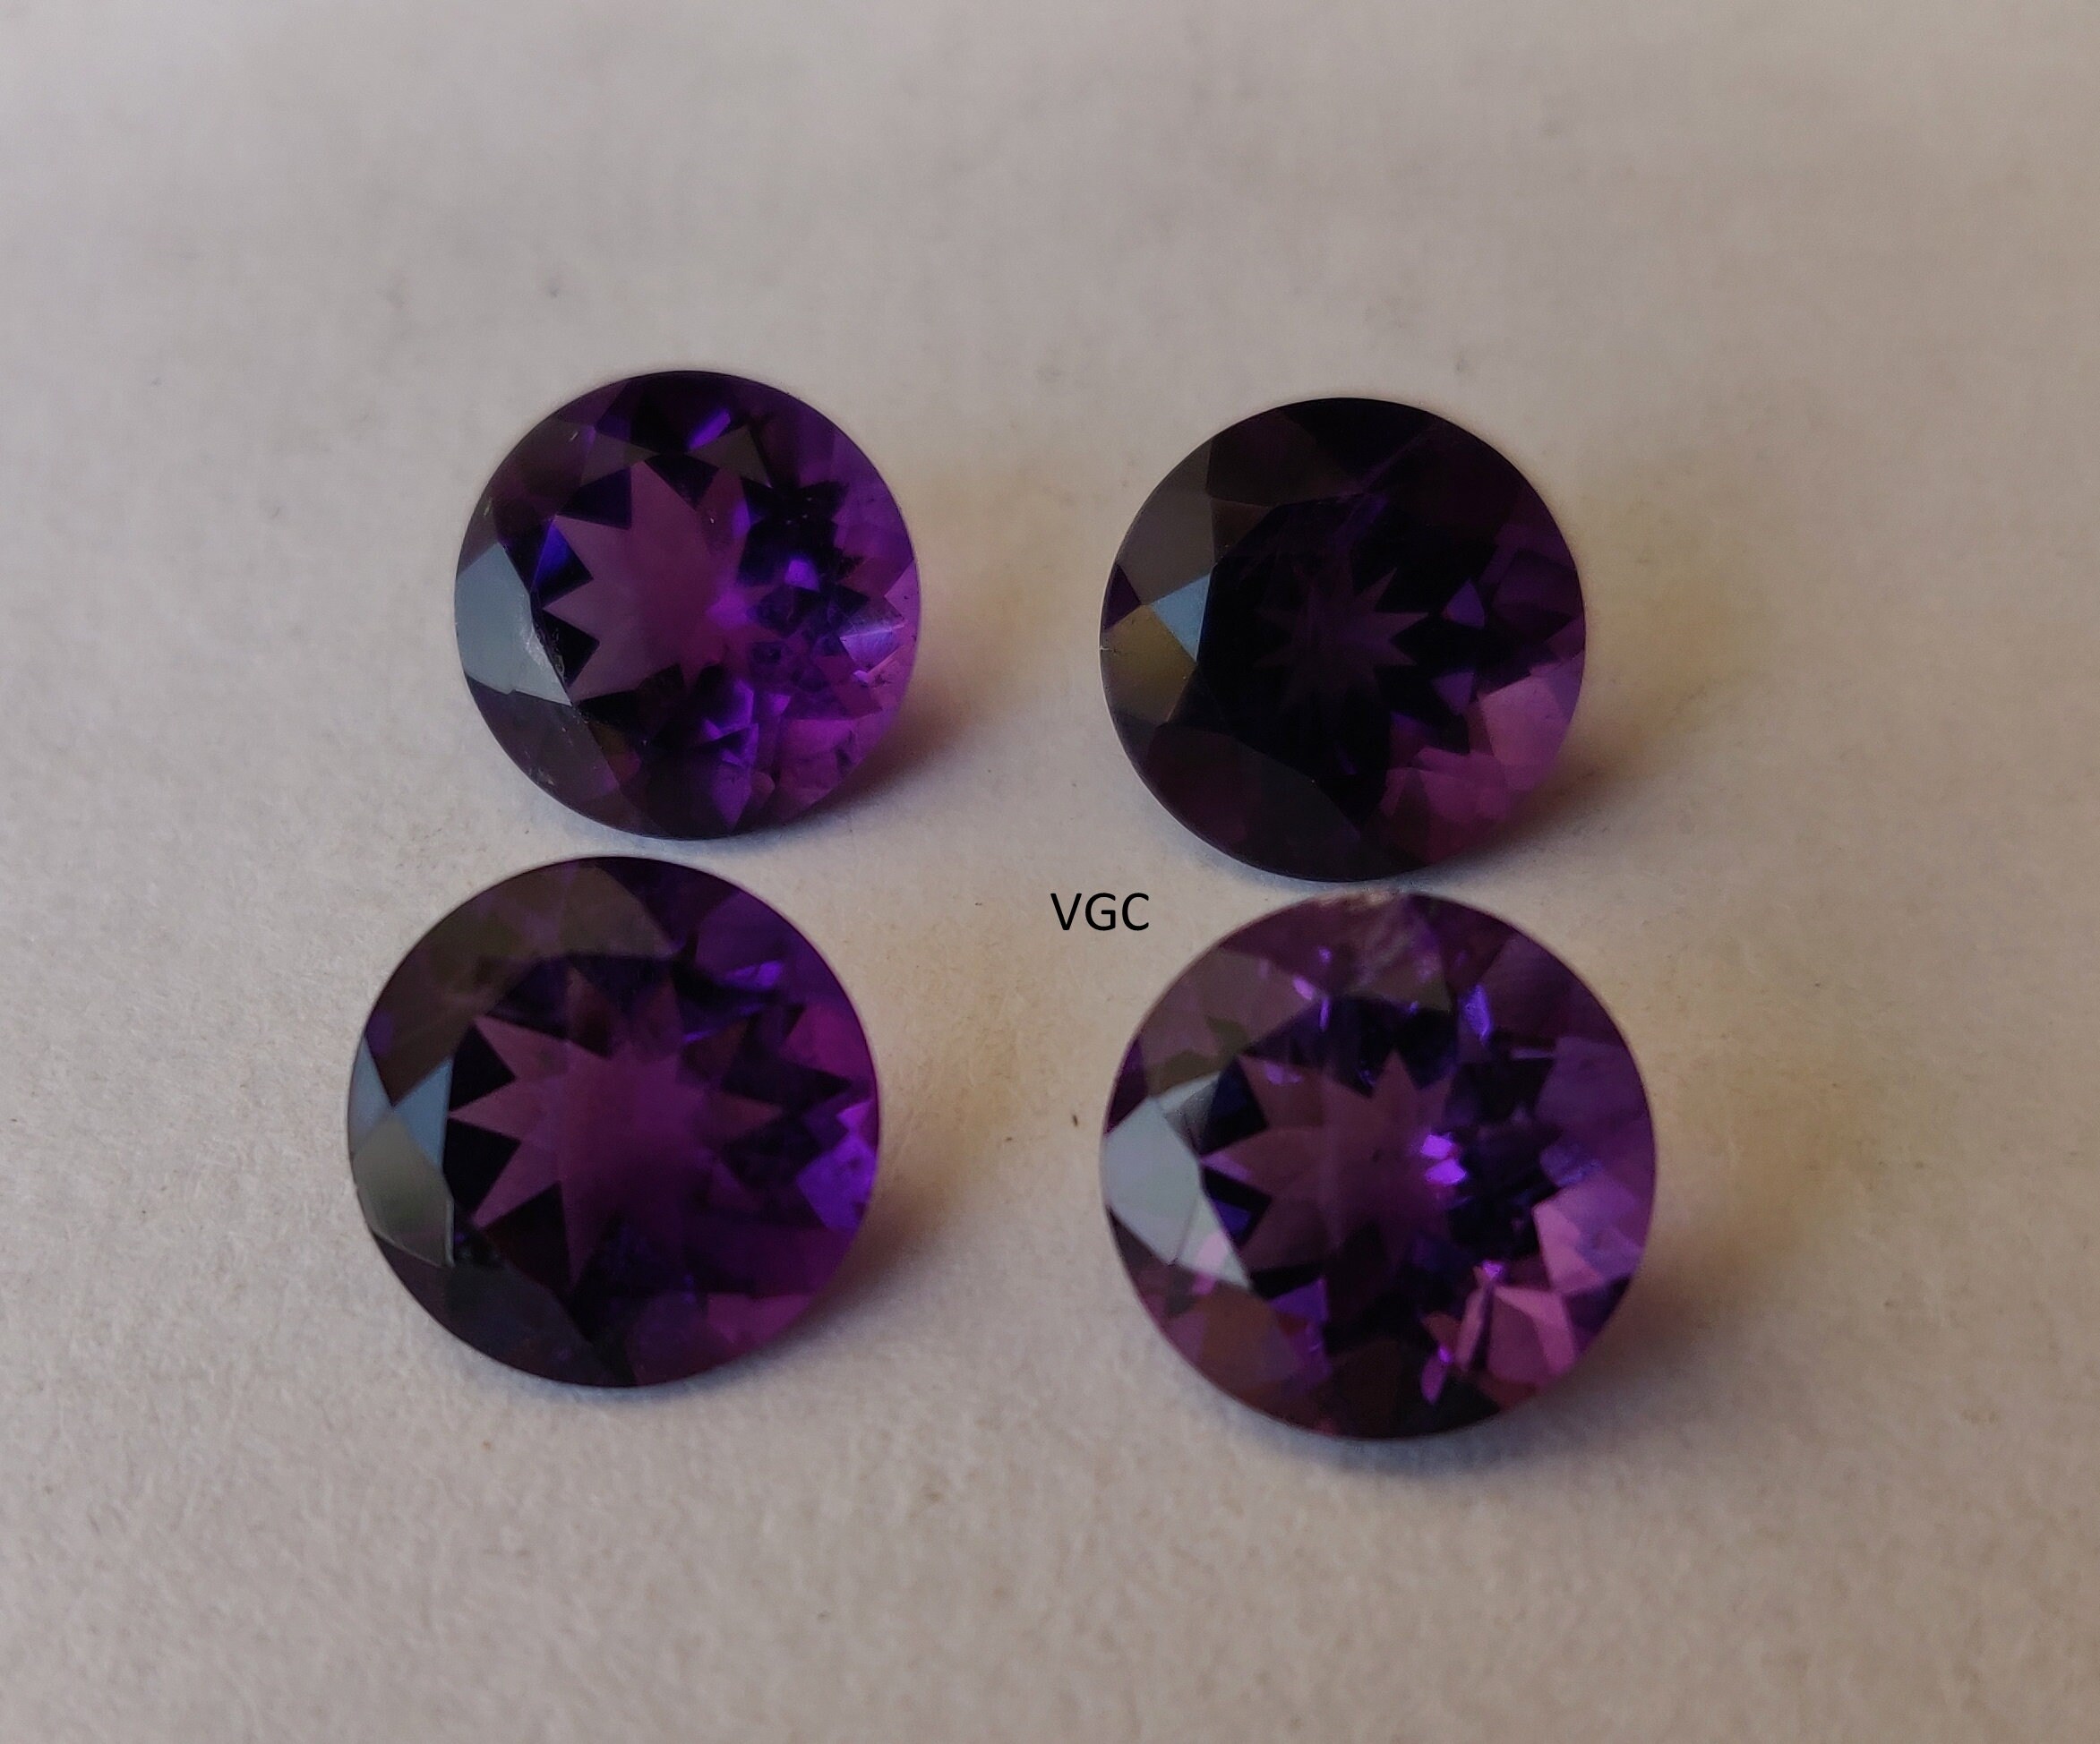 Details about   AAA Quality Natural 8mm African Amethyst Faceted Round Loose Gemstones Wholesale 